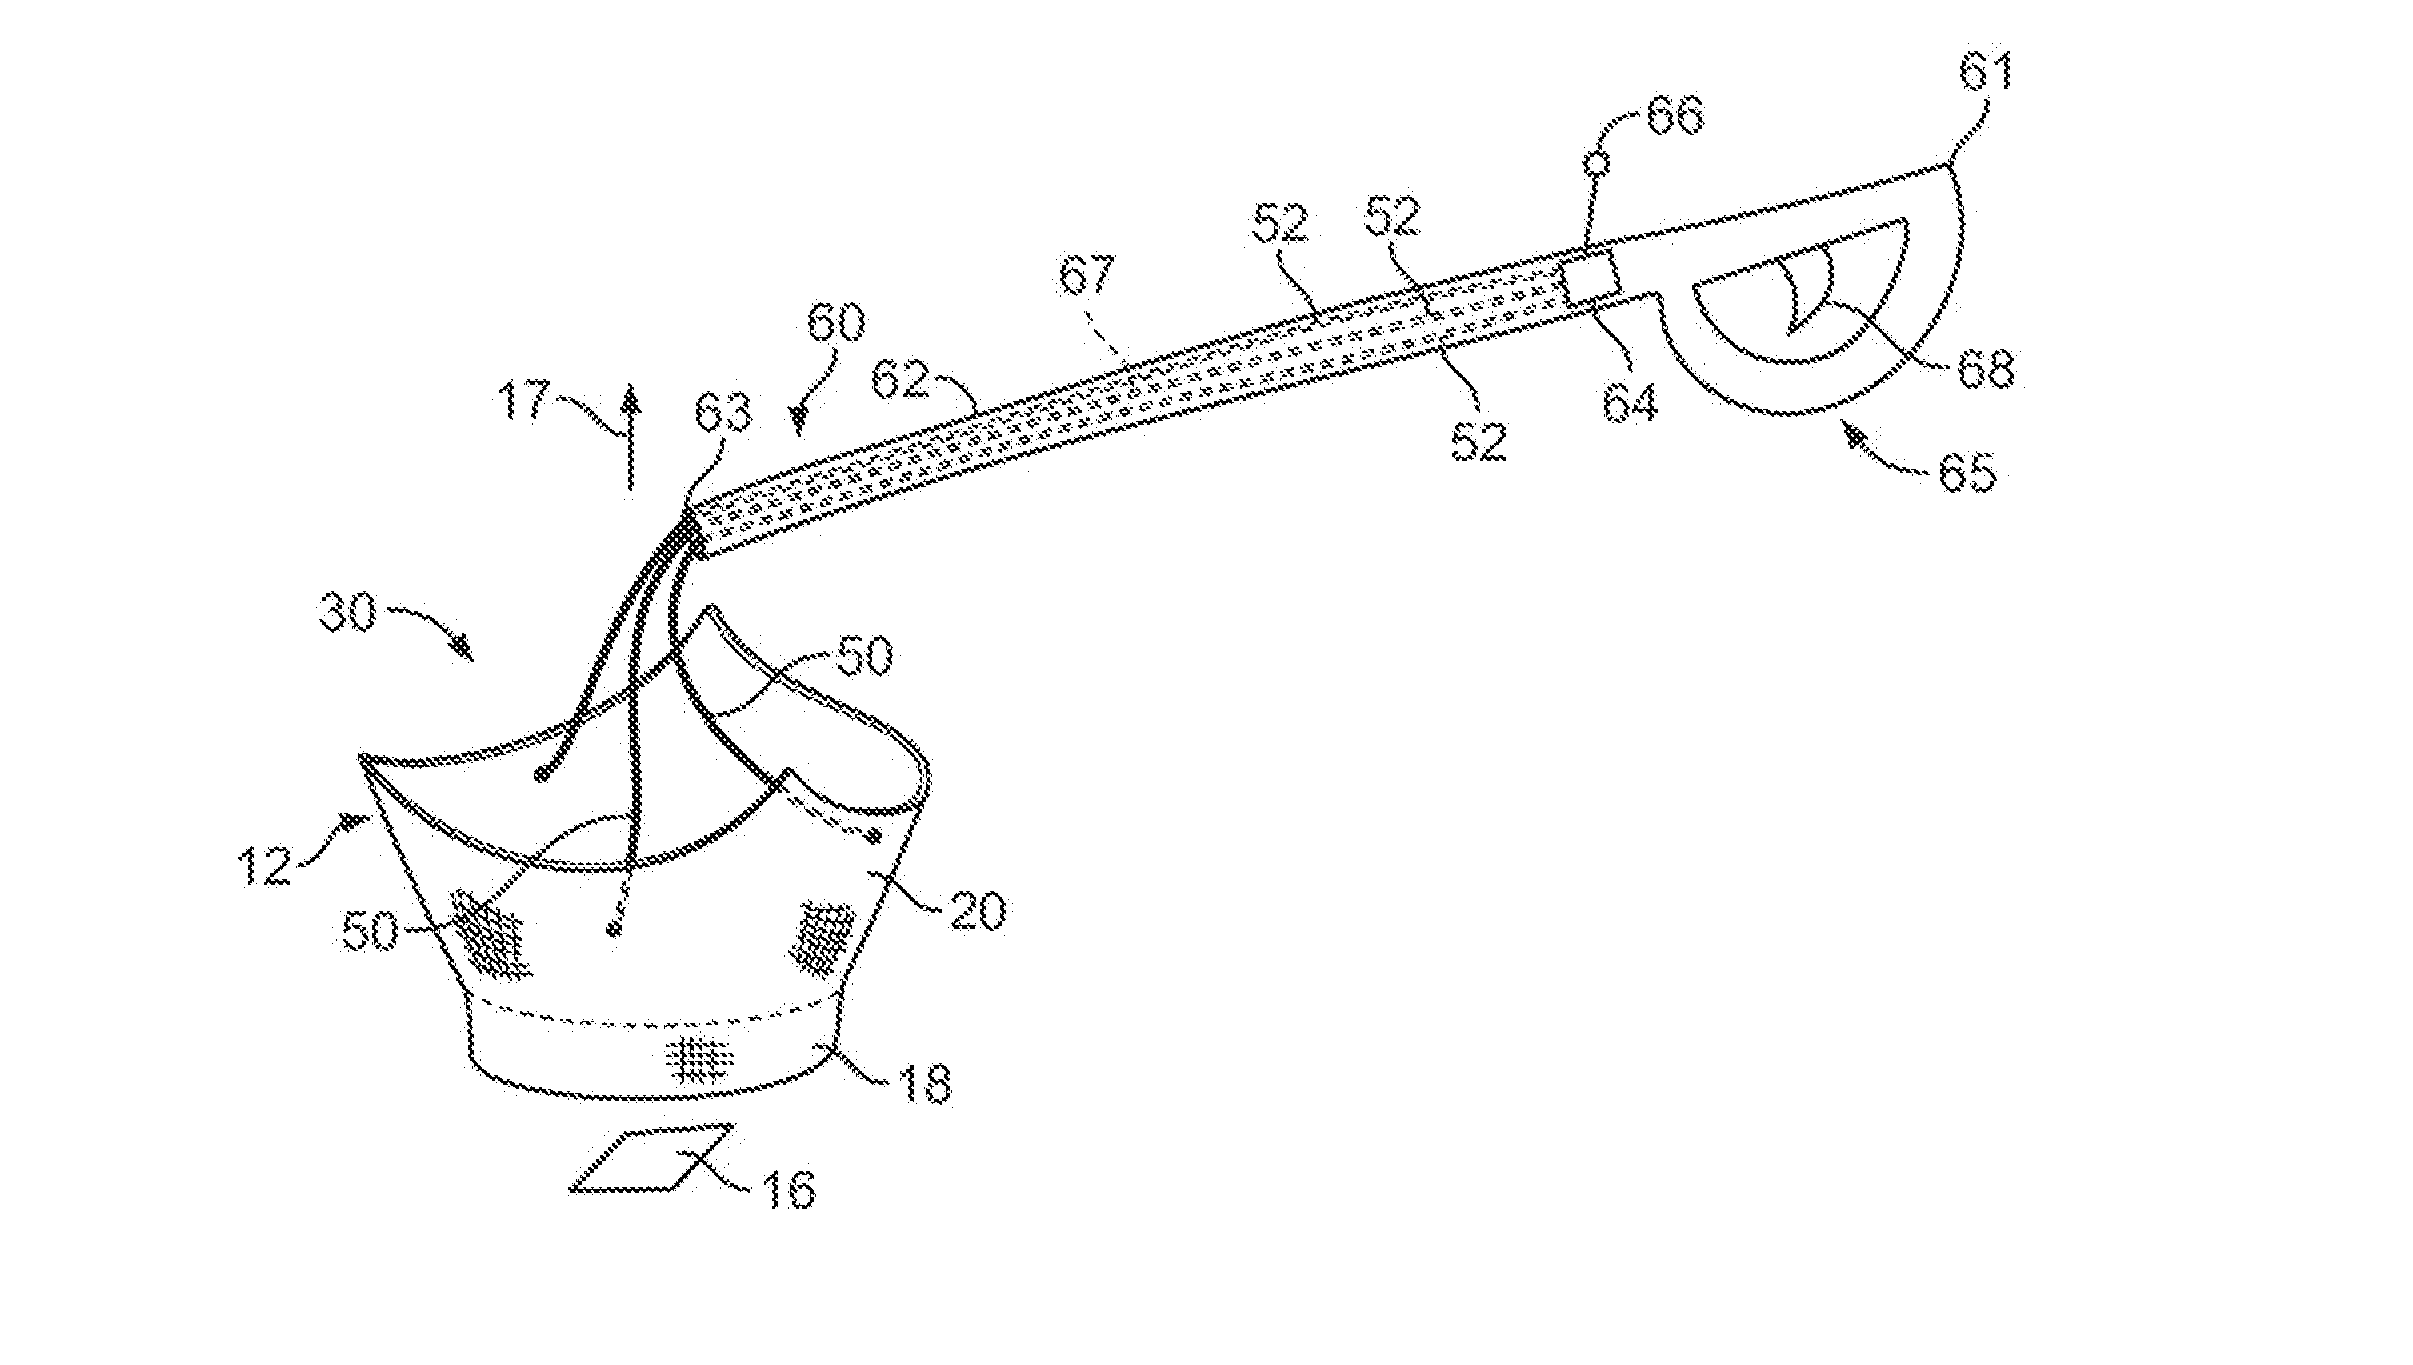 Multiple Component Prosthetic Heart Valve Assemblies and Methods for Delivering Them